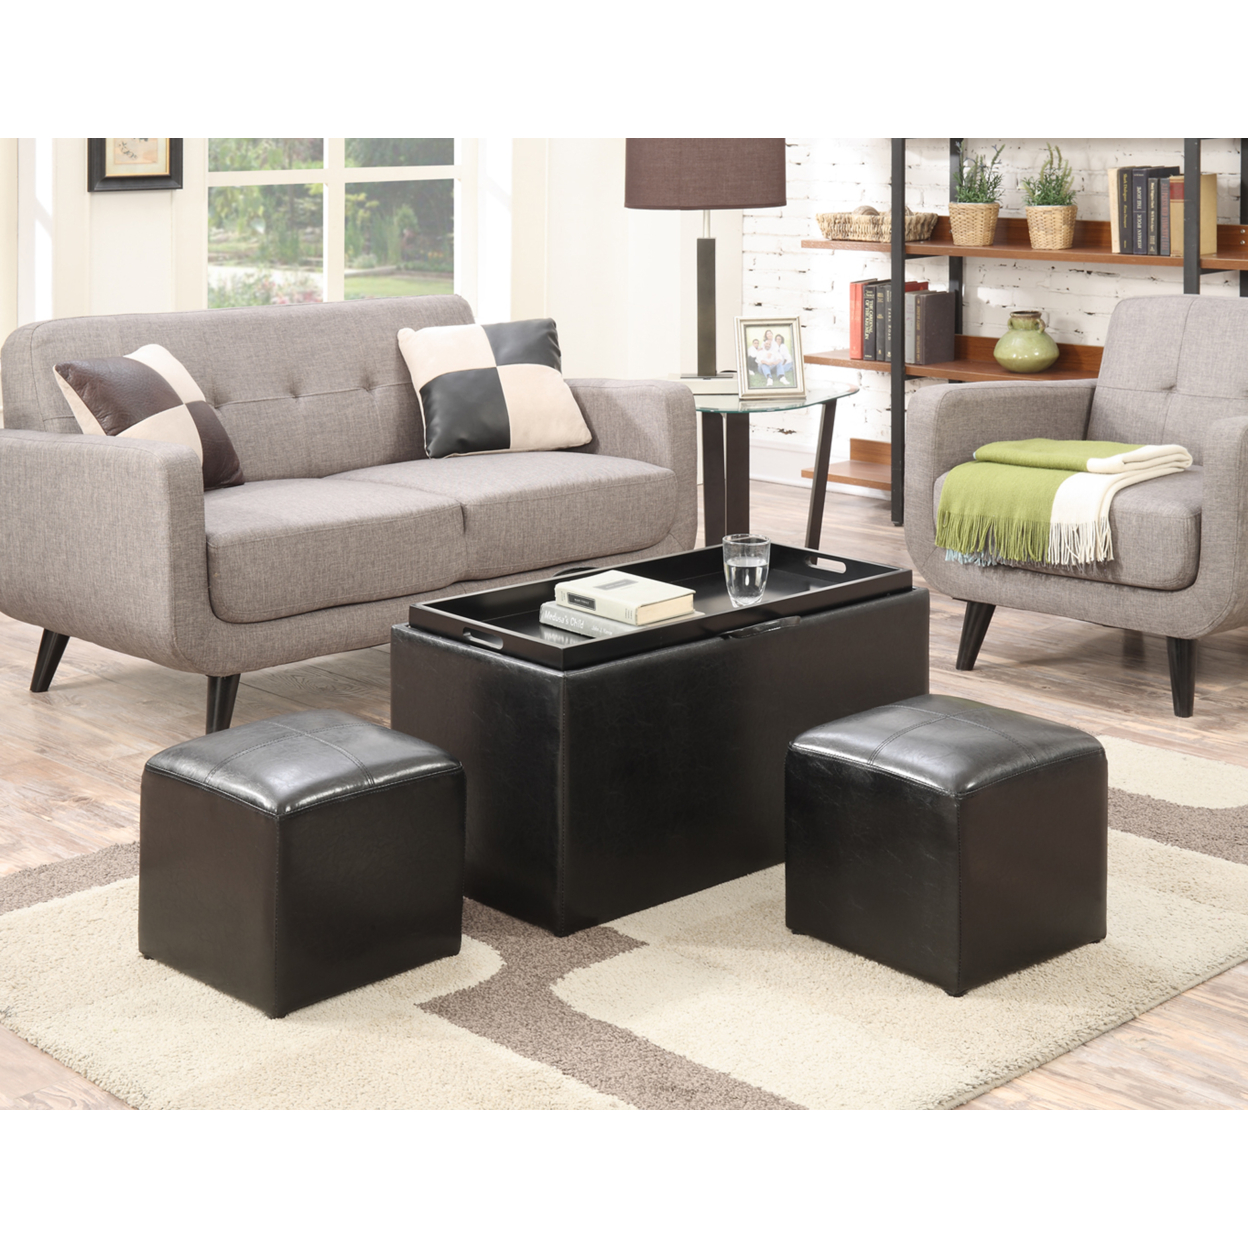 Convenience Concepts Designs4Comfort Sheridan Storage Bench with Reversible Tray and 2 Side Ottomans, Black Faux Leather - image 1 of 7